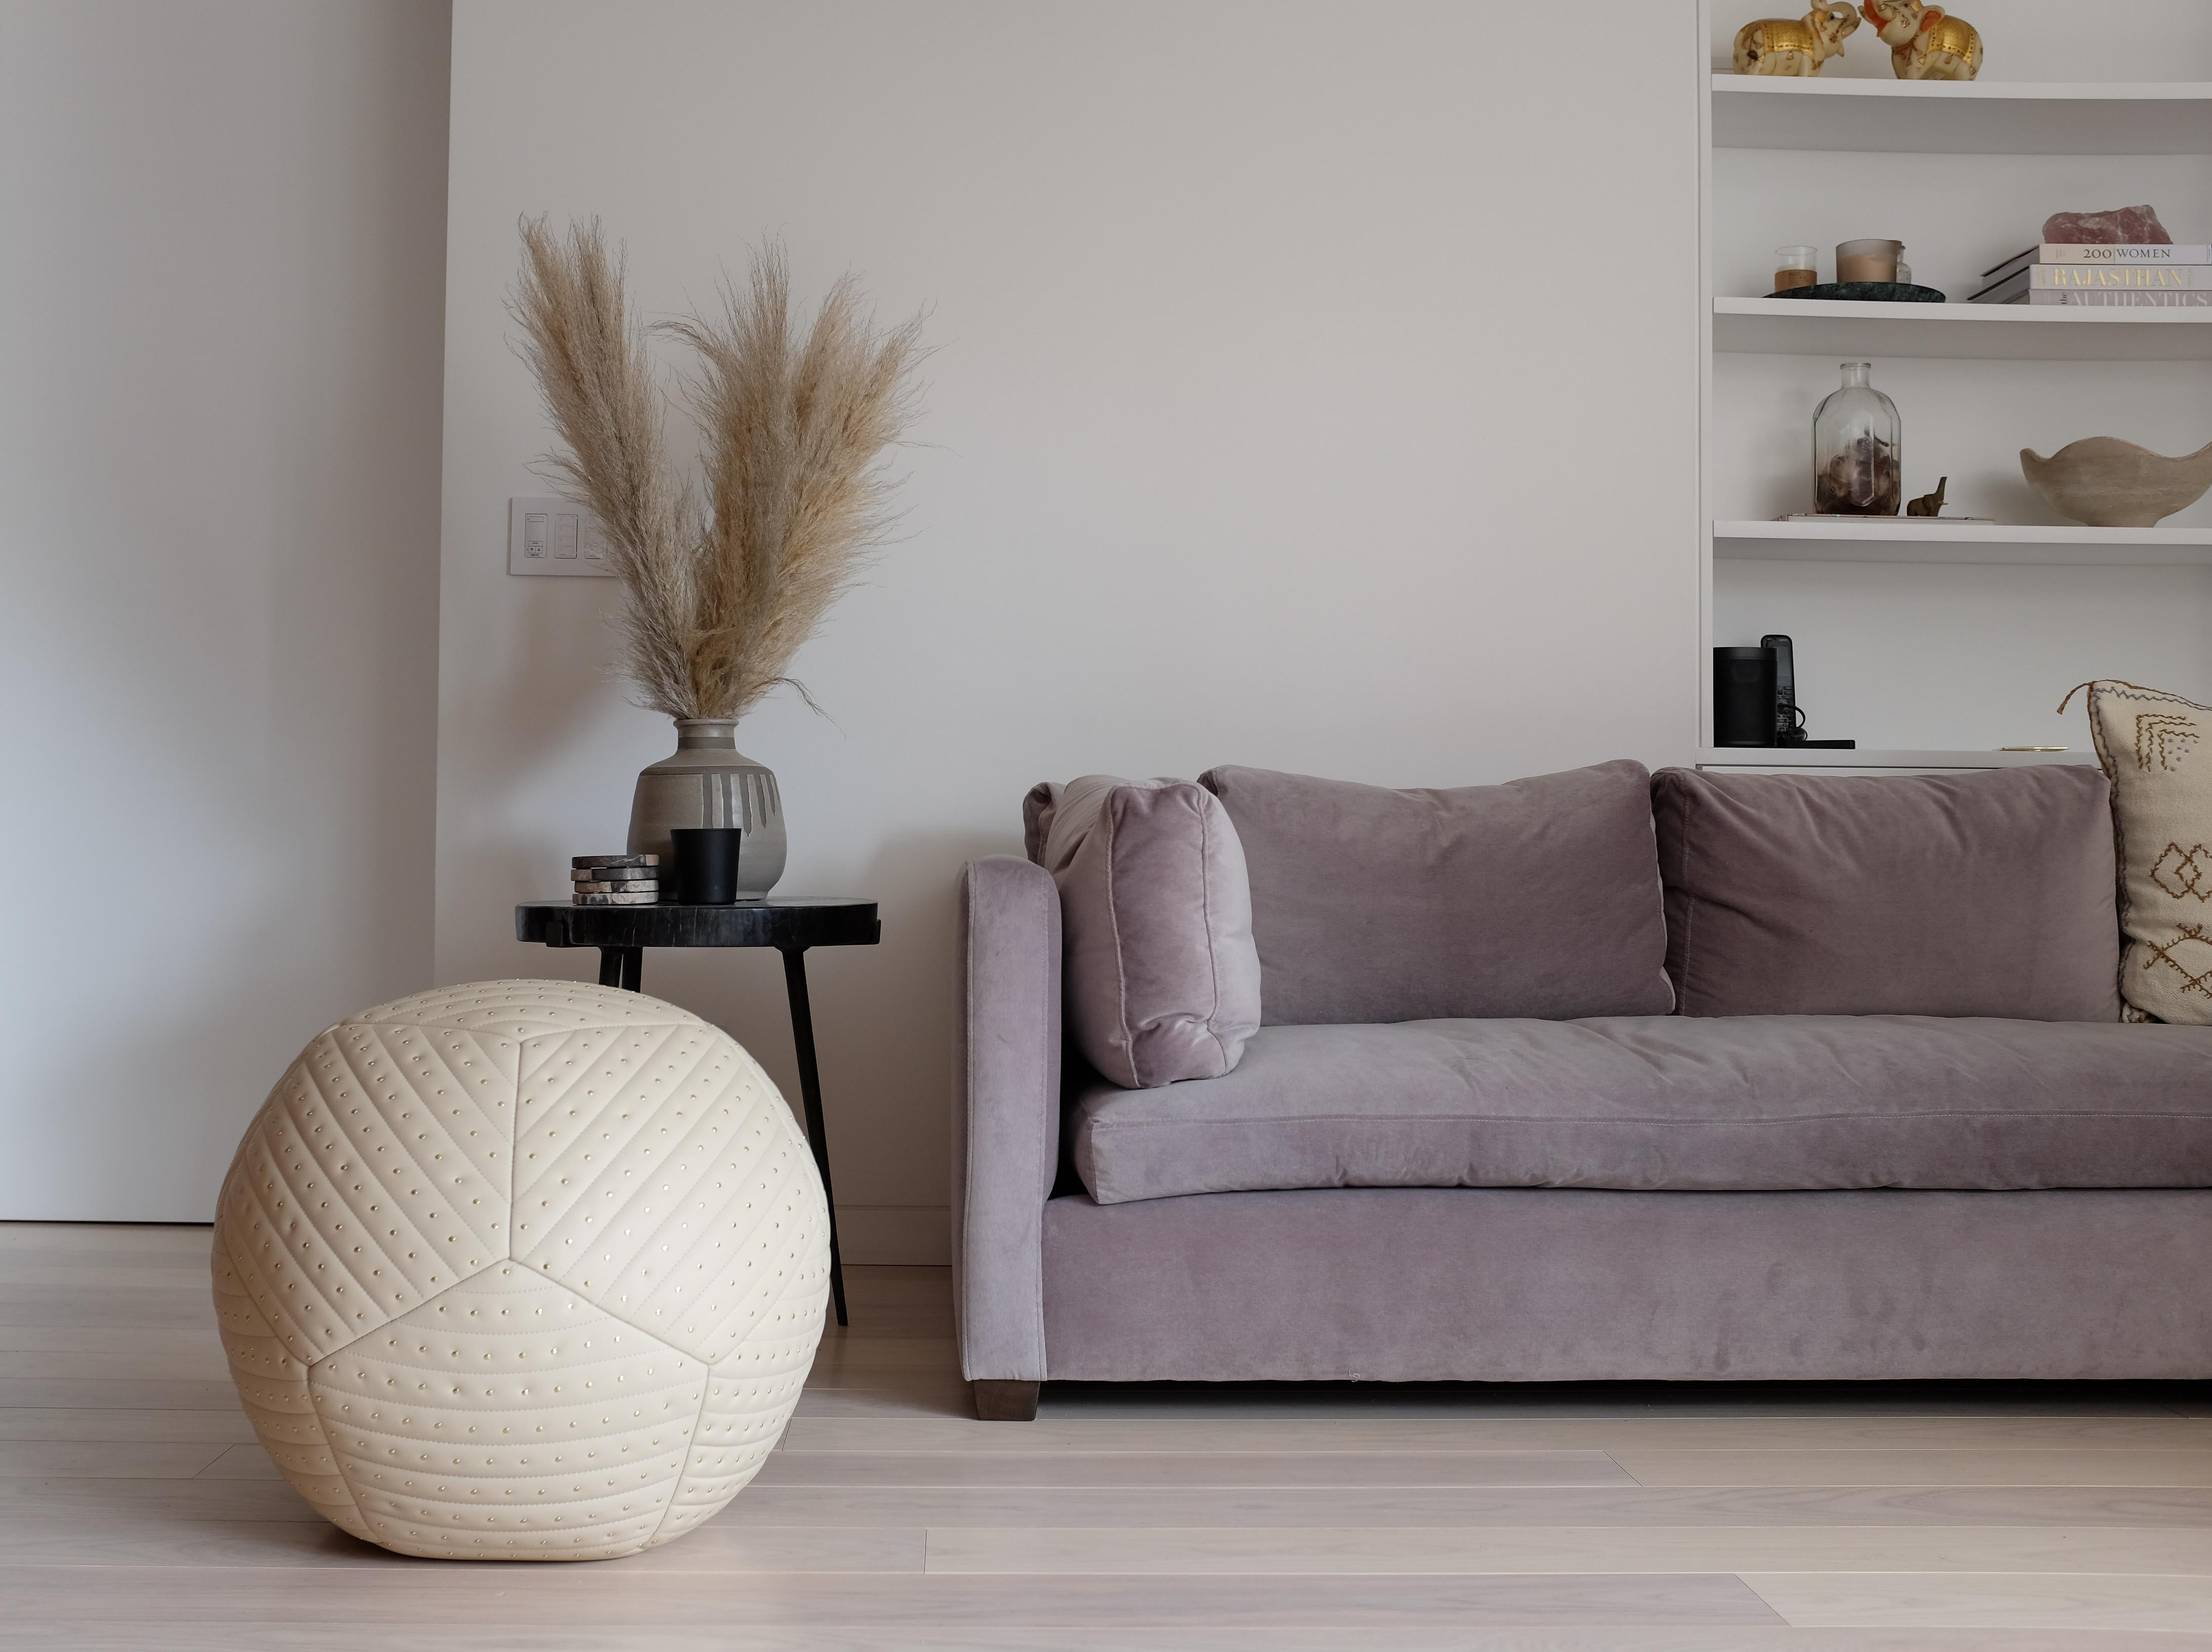 Featured with banded and studded detailing, the Banded Stud Ottoman is inspired by fundamental geometry. These structured and supportive round ball ottomans are designed to function as a traditional leg rest, add a twist to secondary living room